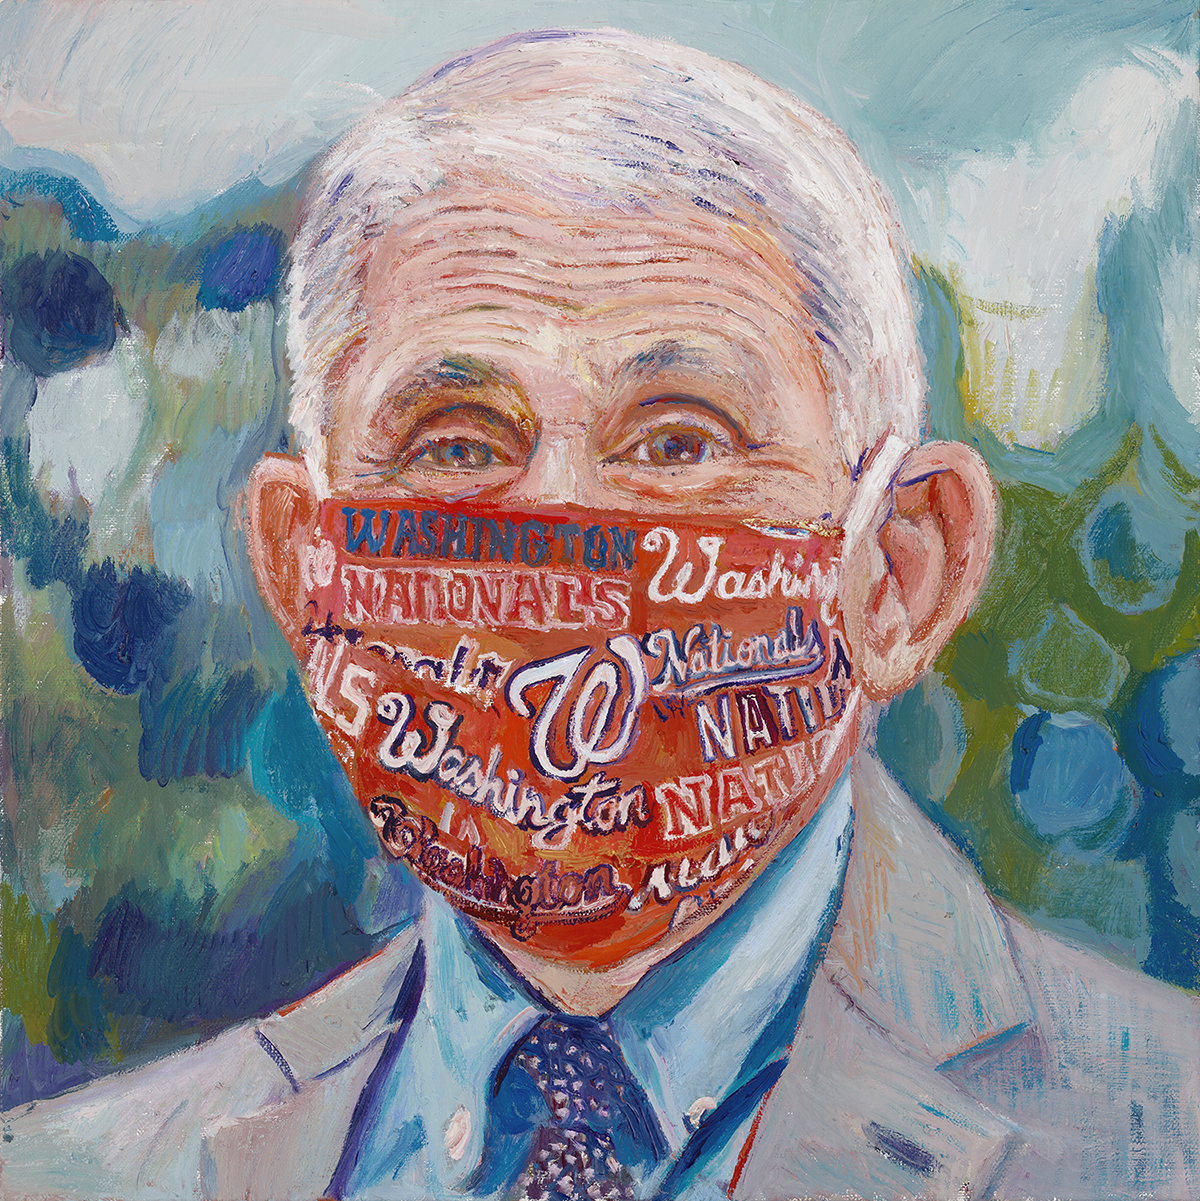 image of Keith Mayerson's print "Homage to America’s Doctor, Anthony S. Fauci"